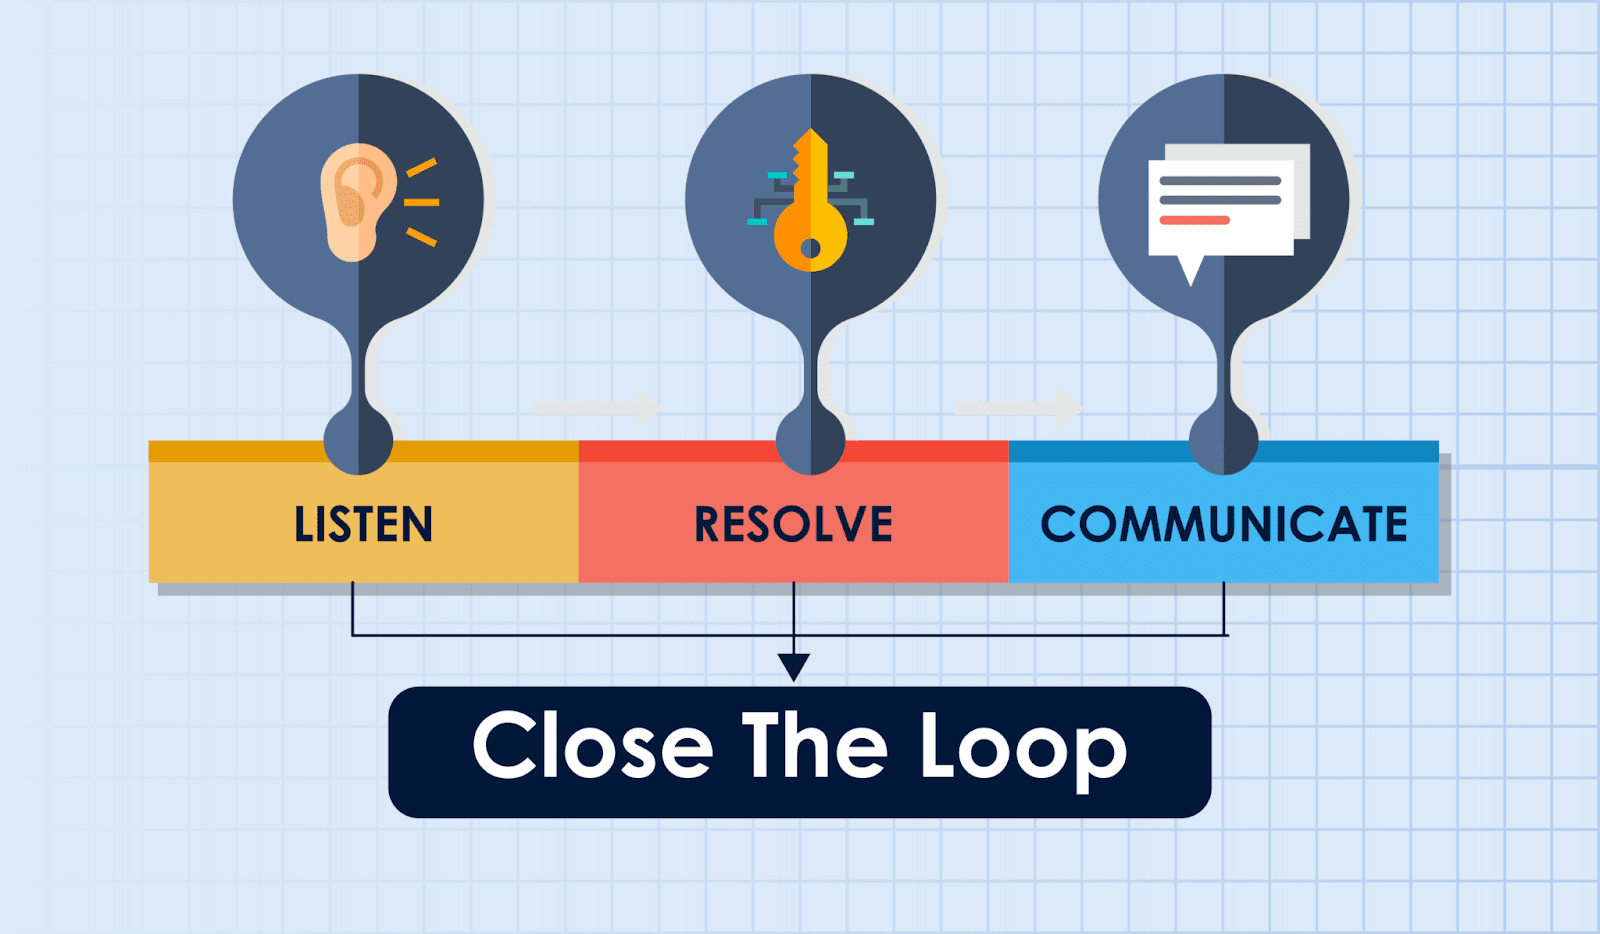 This image is a pictorial representation of closing the feedback loop - this process includes creating a continuous loop between listening to your customers, resolving their issues, and communicating the changes to your customers.